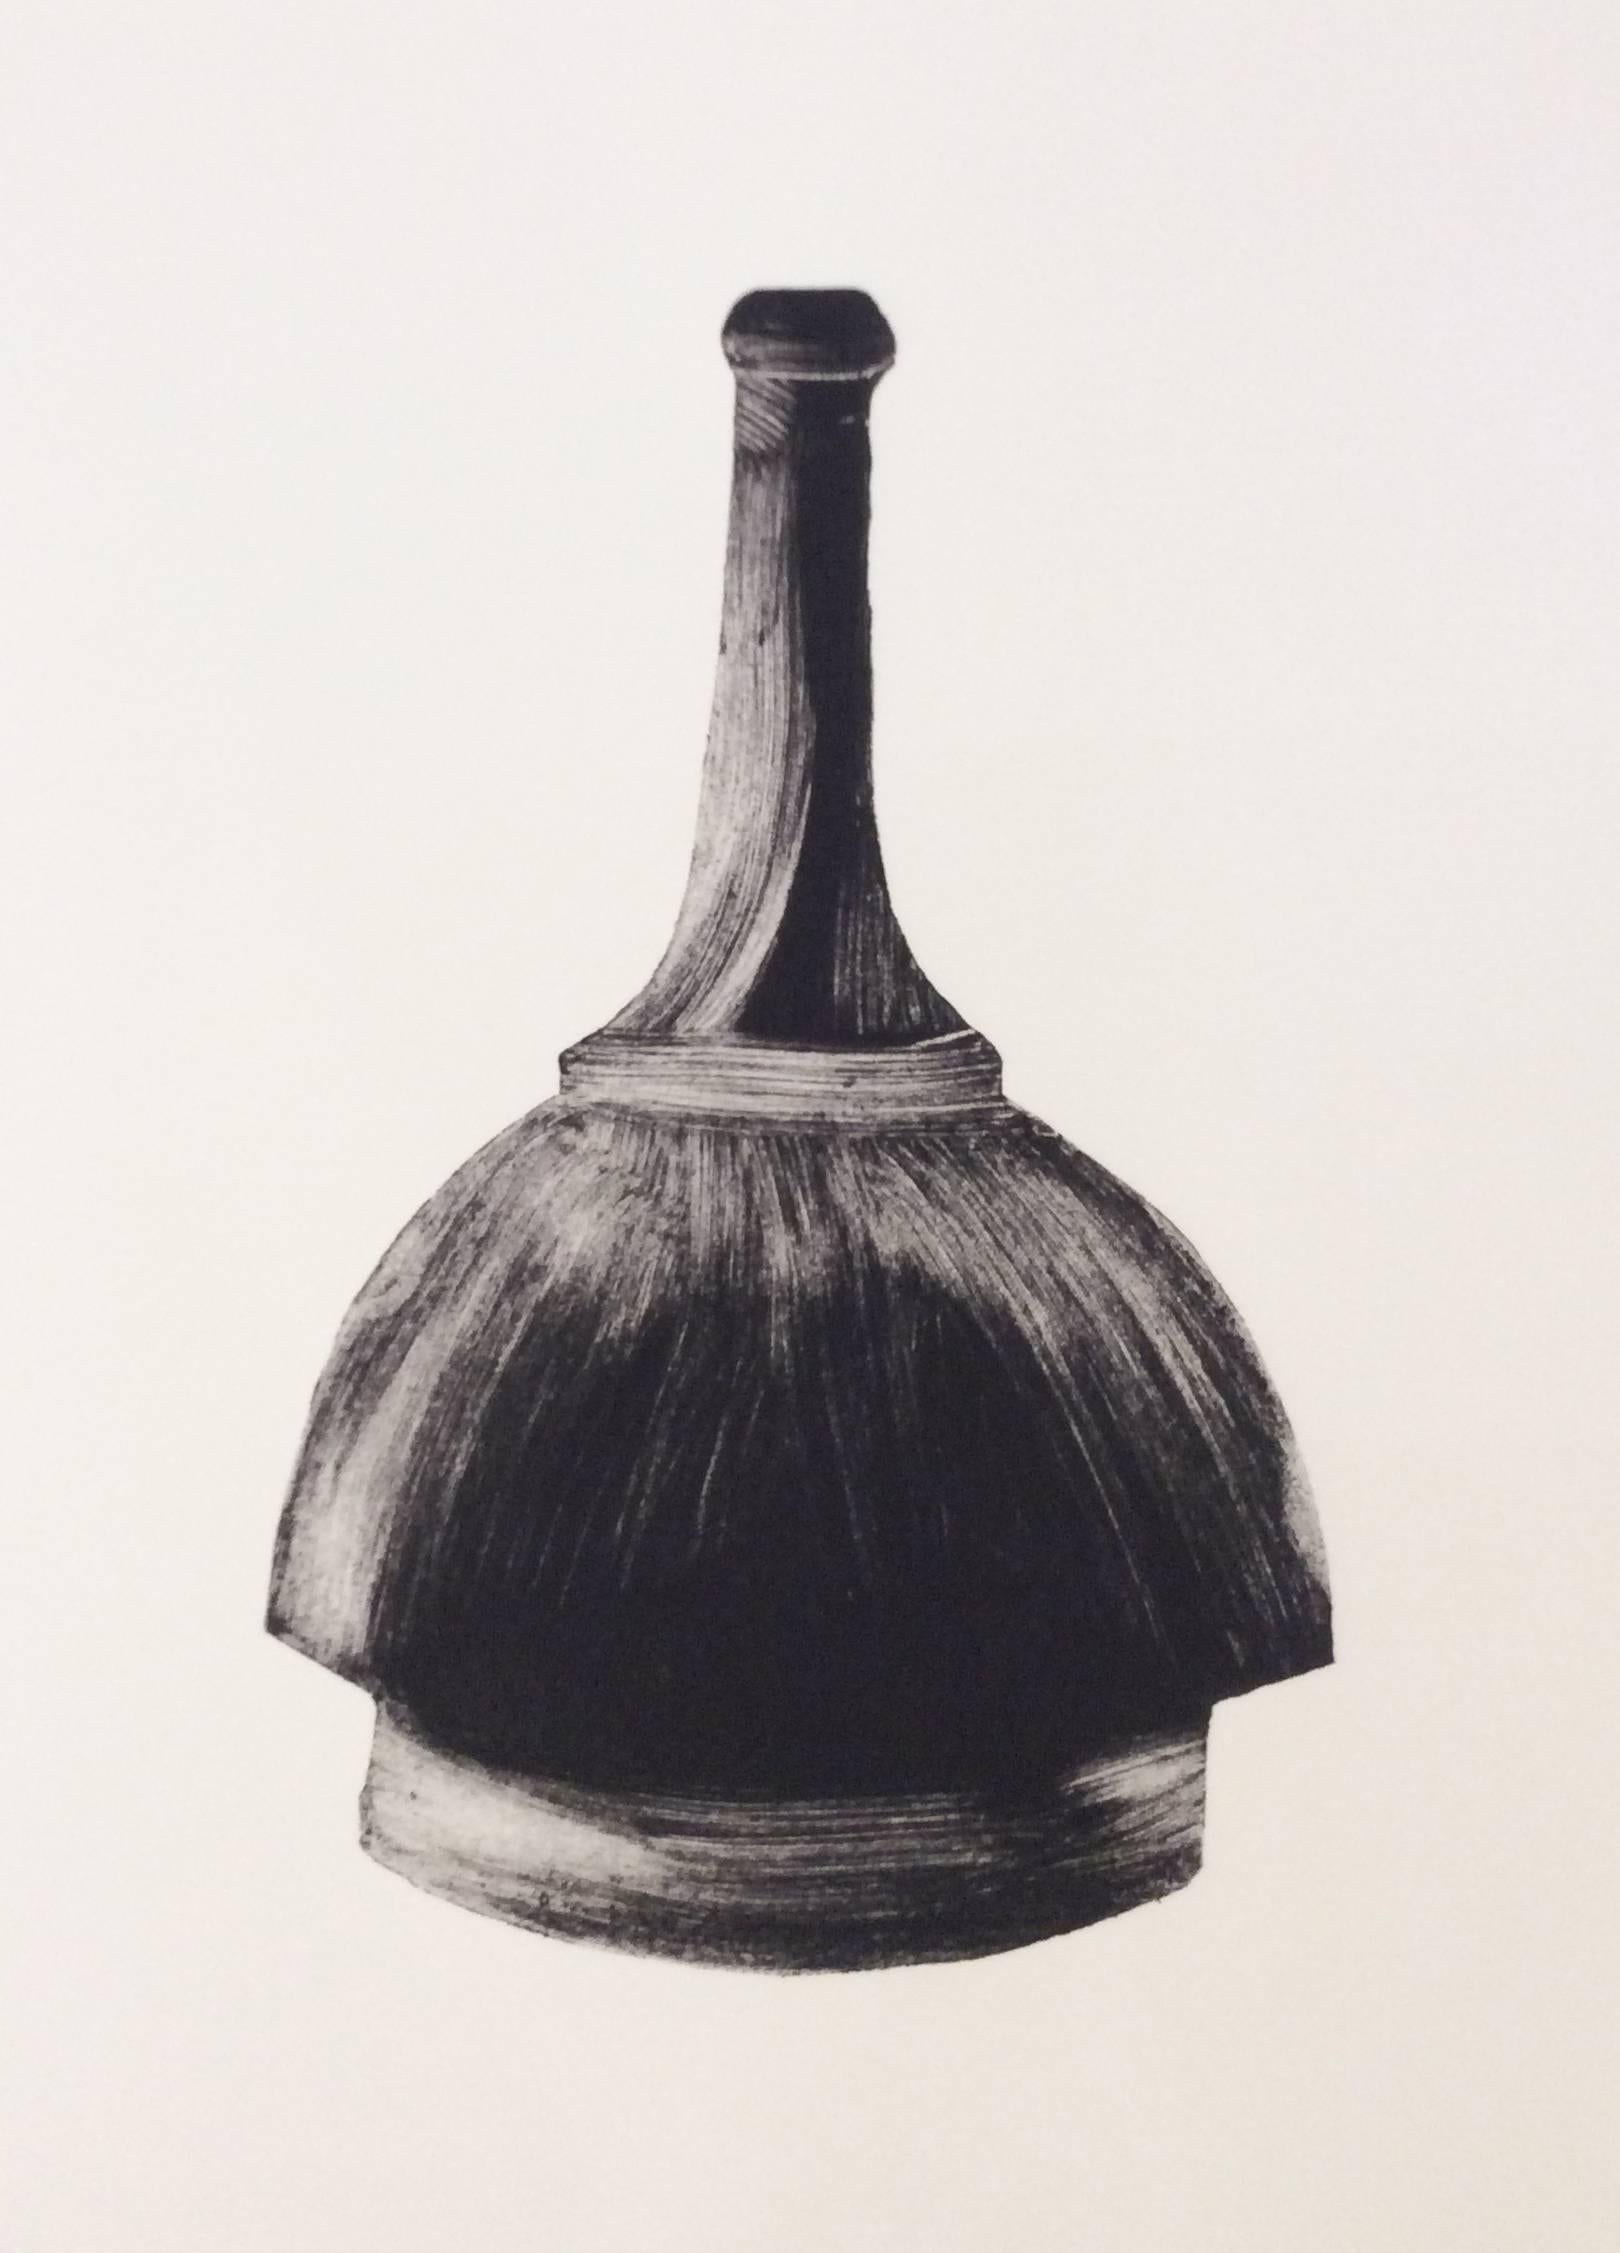 Morandi Series II - Cruet, 2017
Giclee print on archival paper
23.25 x 16.75 x .07 inches
Signed on reverse
Ed. 1/10

This listing is available from Carrie Haddad Gallery, based in Hudson, NY.

This black and white giclée print evokes rustic